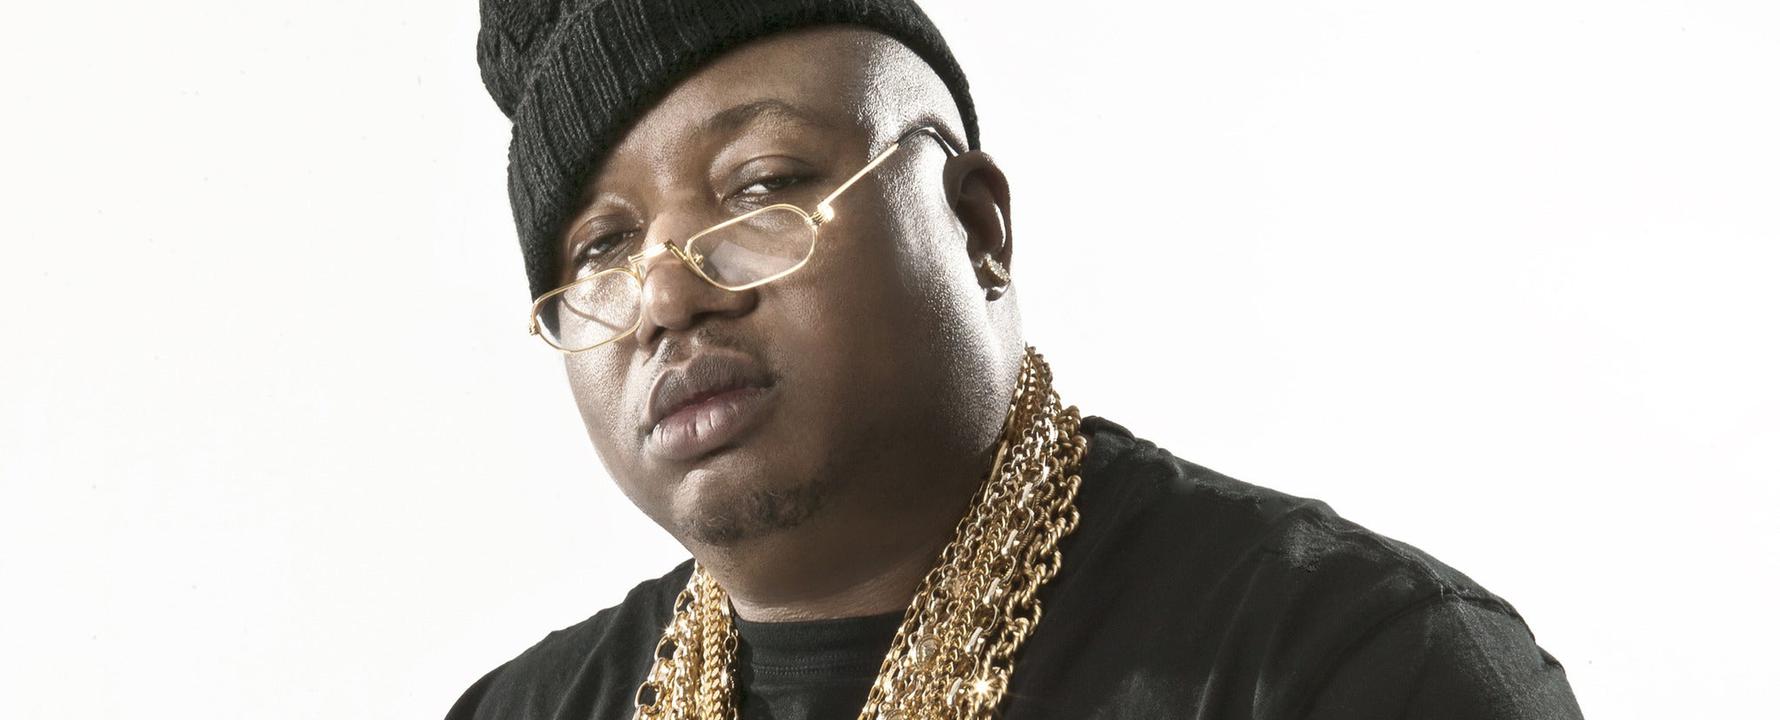 Promotional photograph of E-40.